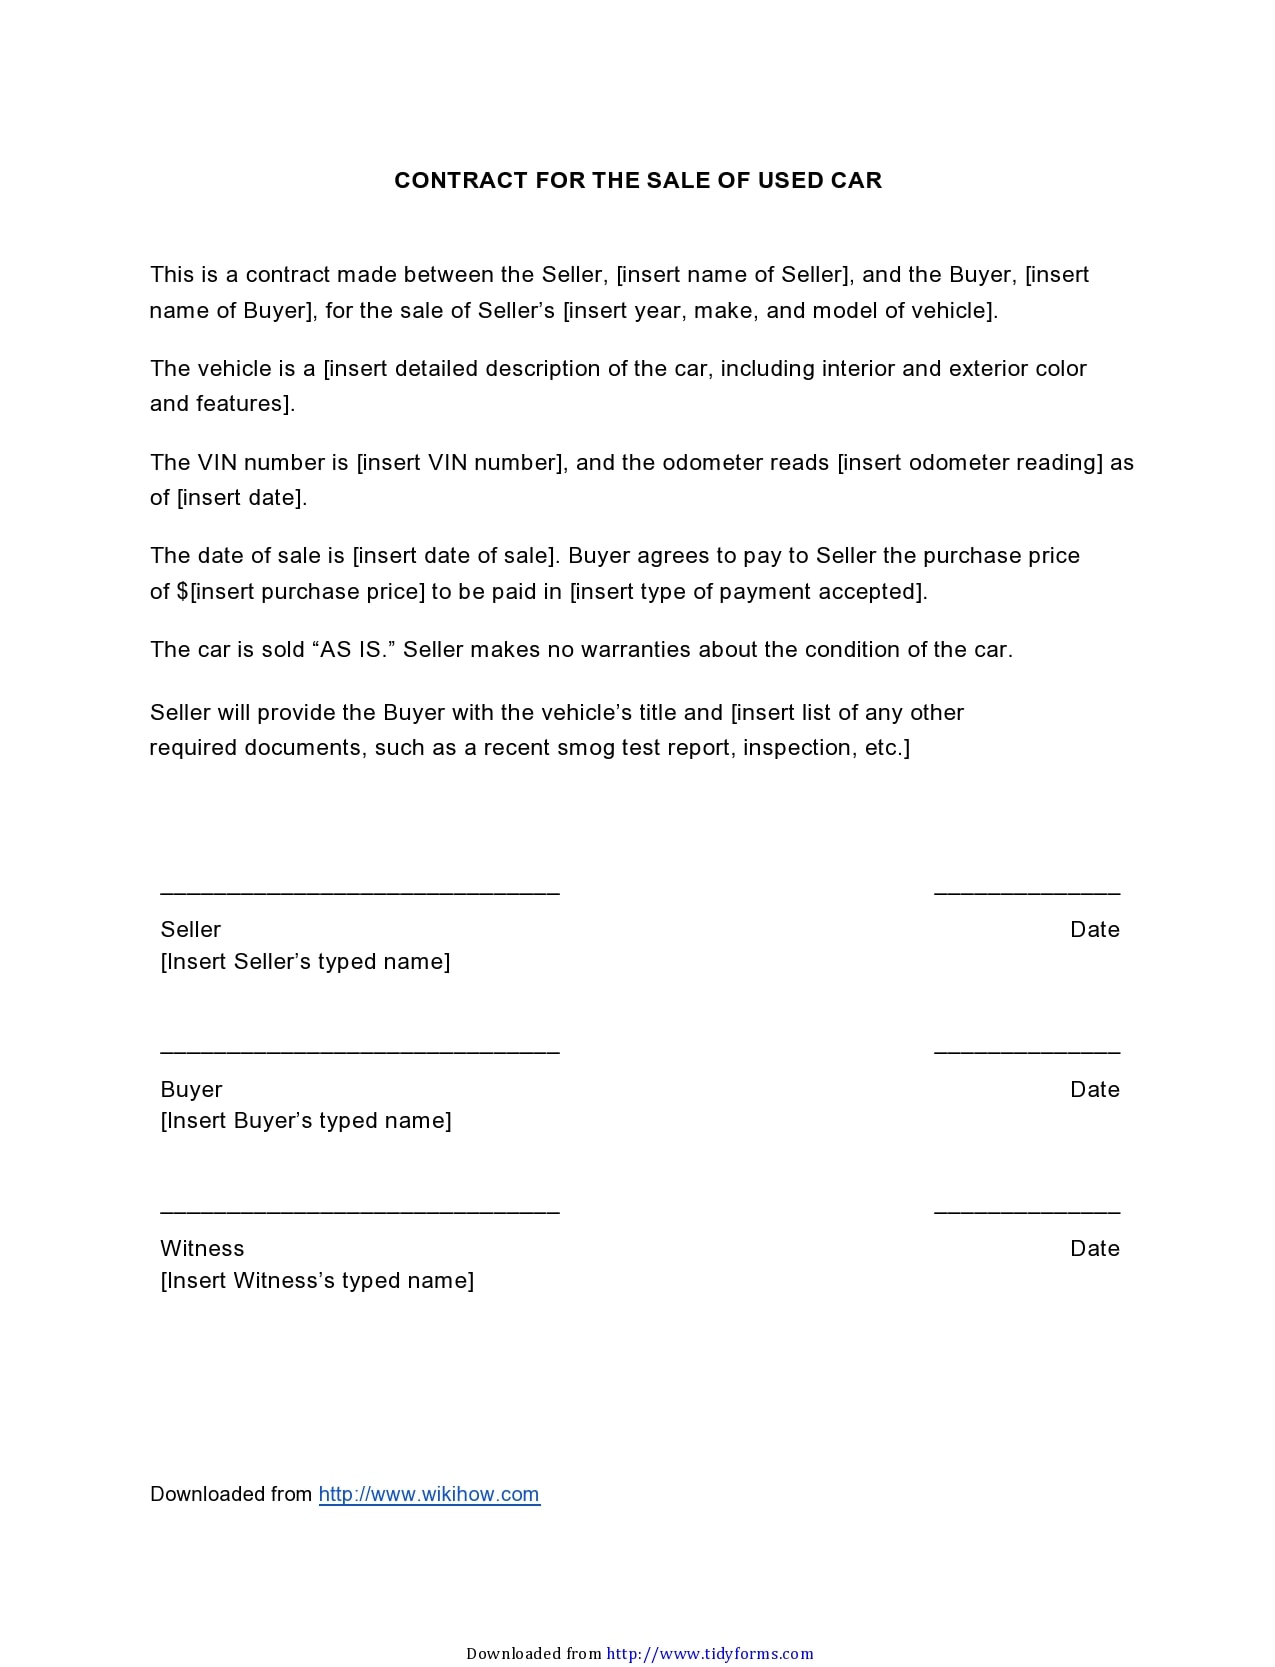 20 Simple Car Sale Contract Templates [20% Free] Pertaining To car warranty agreement template